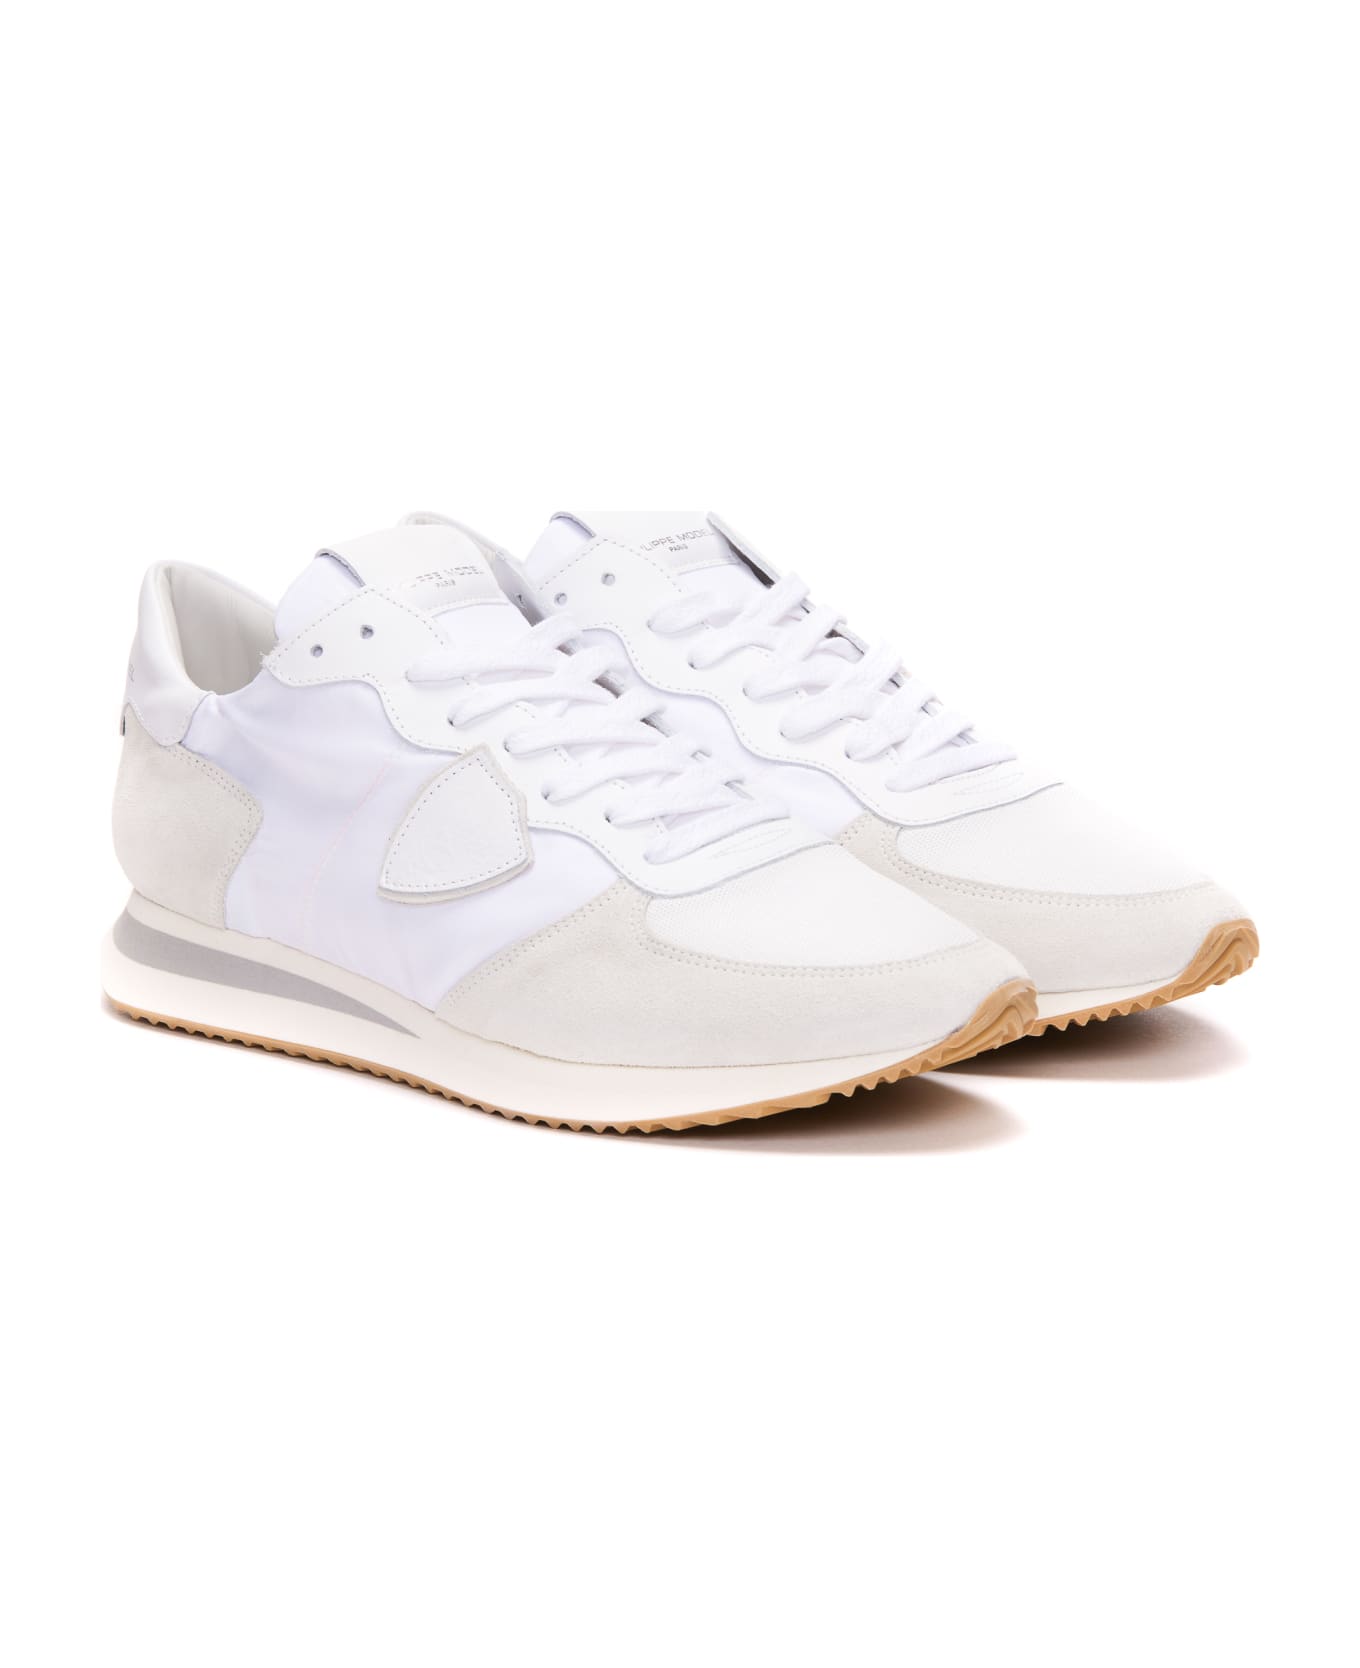 Philippe Model Trpx Low Sneakers - White